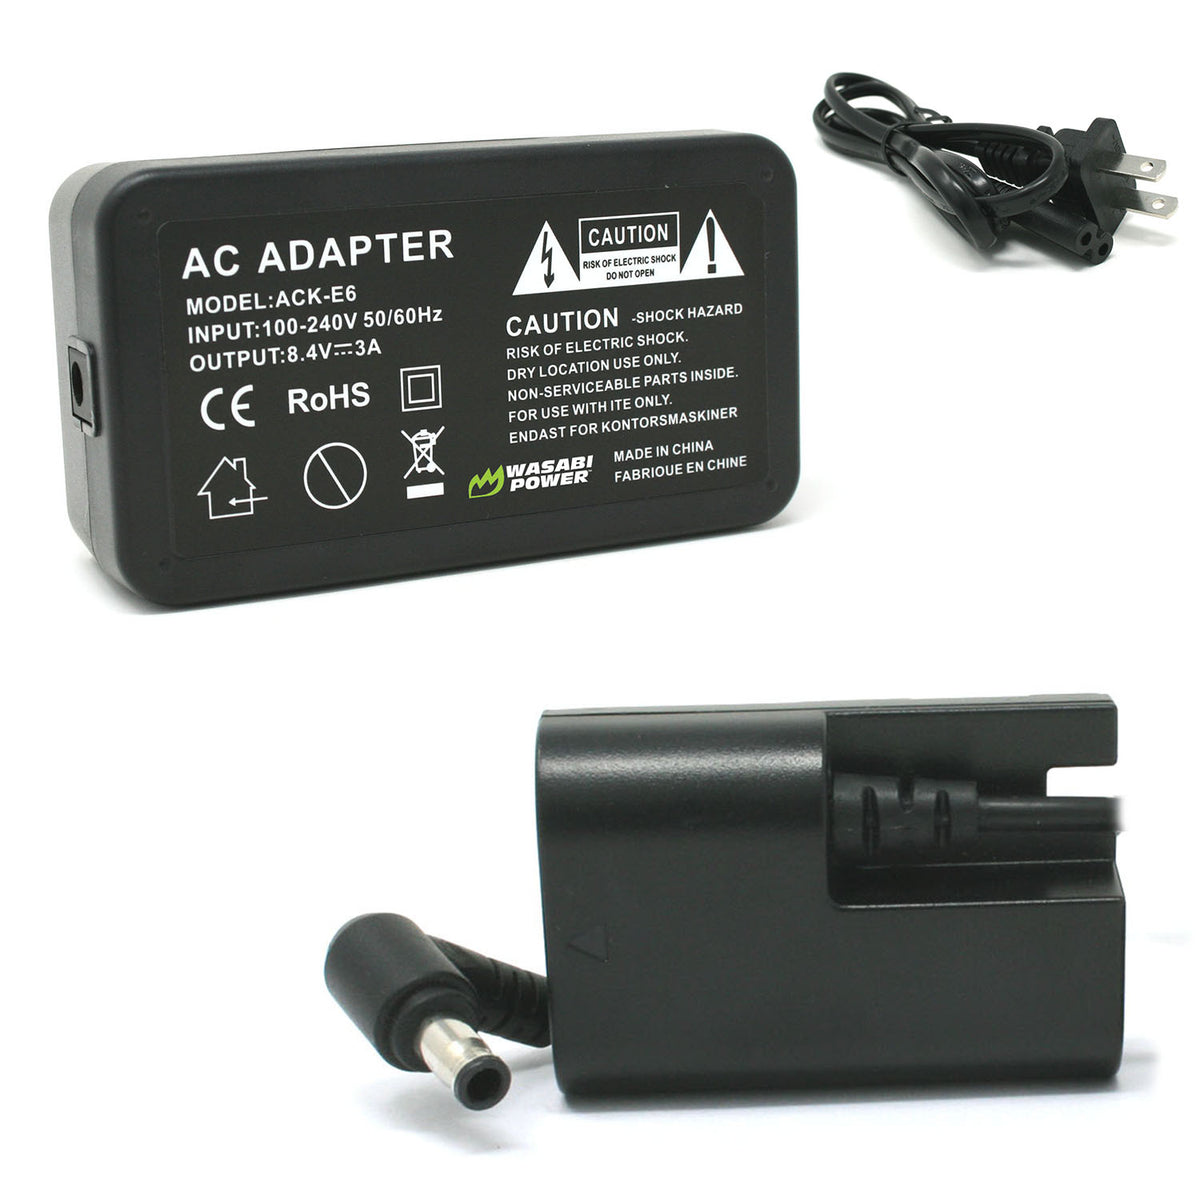 Canon AC Power Adapter Kit (Fully Decoded) with DC Coupler for C – Wasabi Power